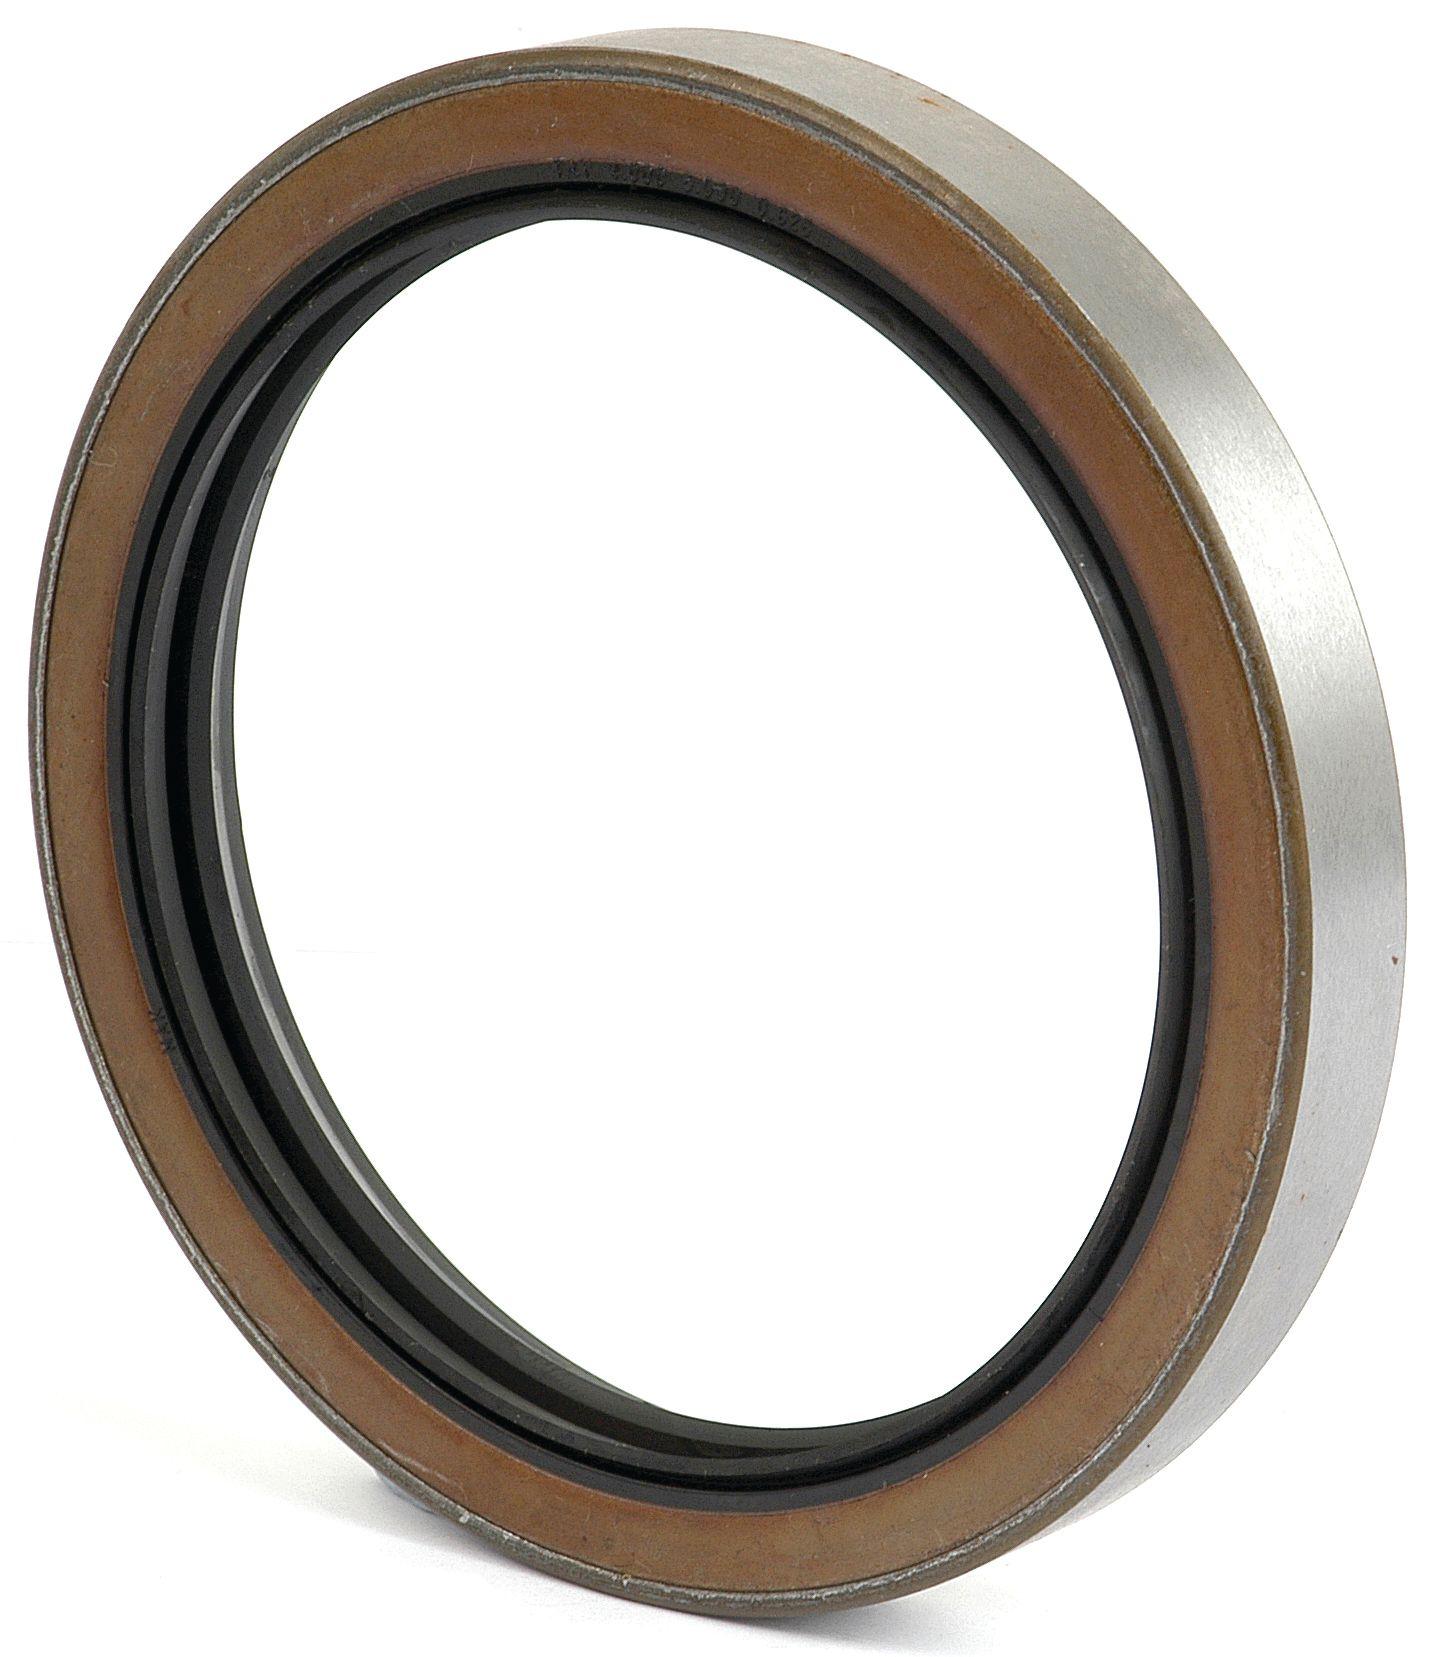 CASE IH SEAL-OUTER 7857